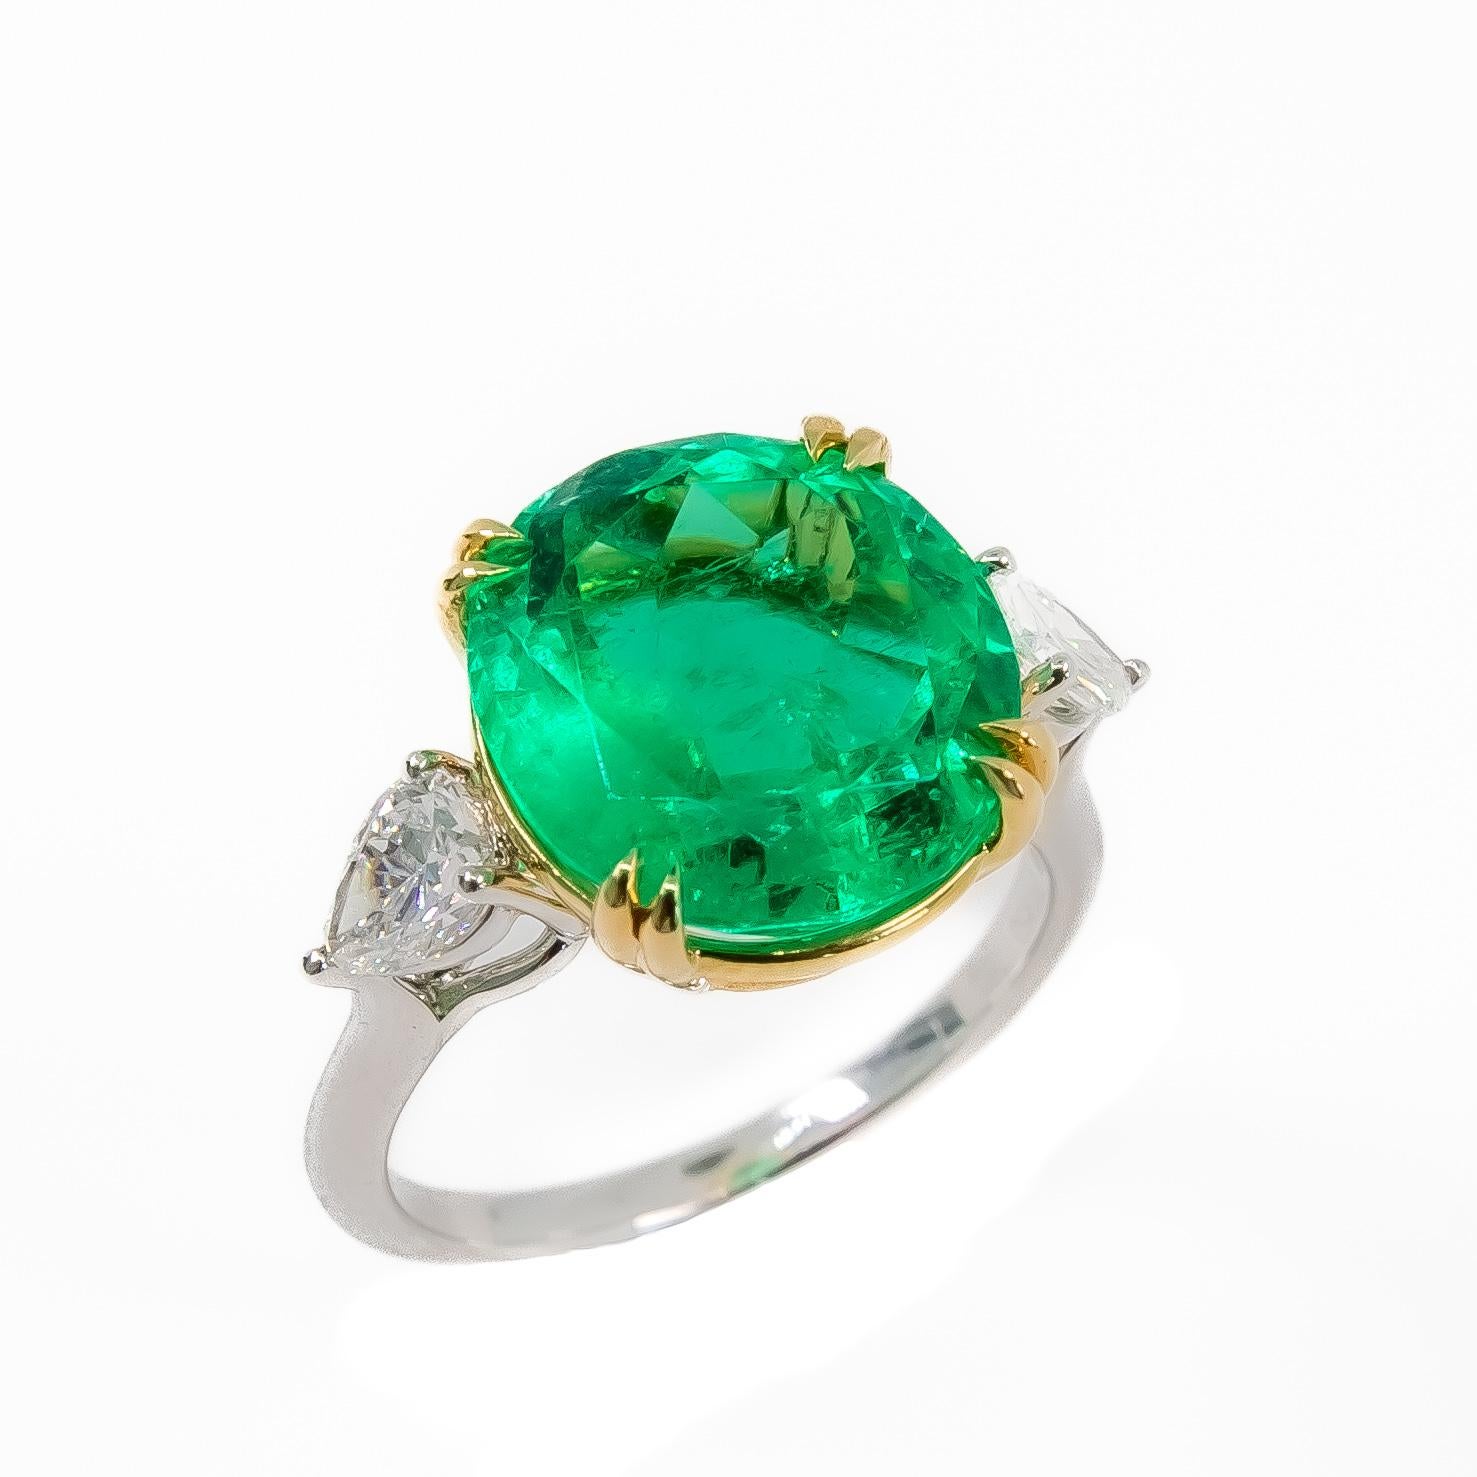 Absolutely breathtakingly beautiful cocktail ring / engagement ring. 

5.51ct GRS Certified Insignificant Oil Colombian Emerald. Stunning medium Green Colour with incredible lustre and clarity. If you prefer lighter emeralds with more life and